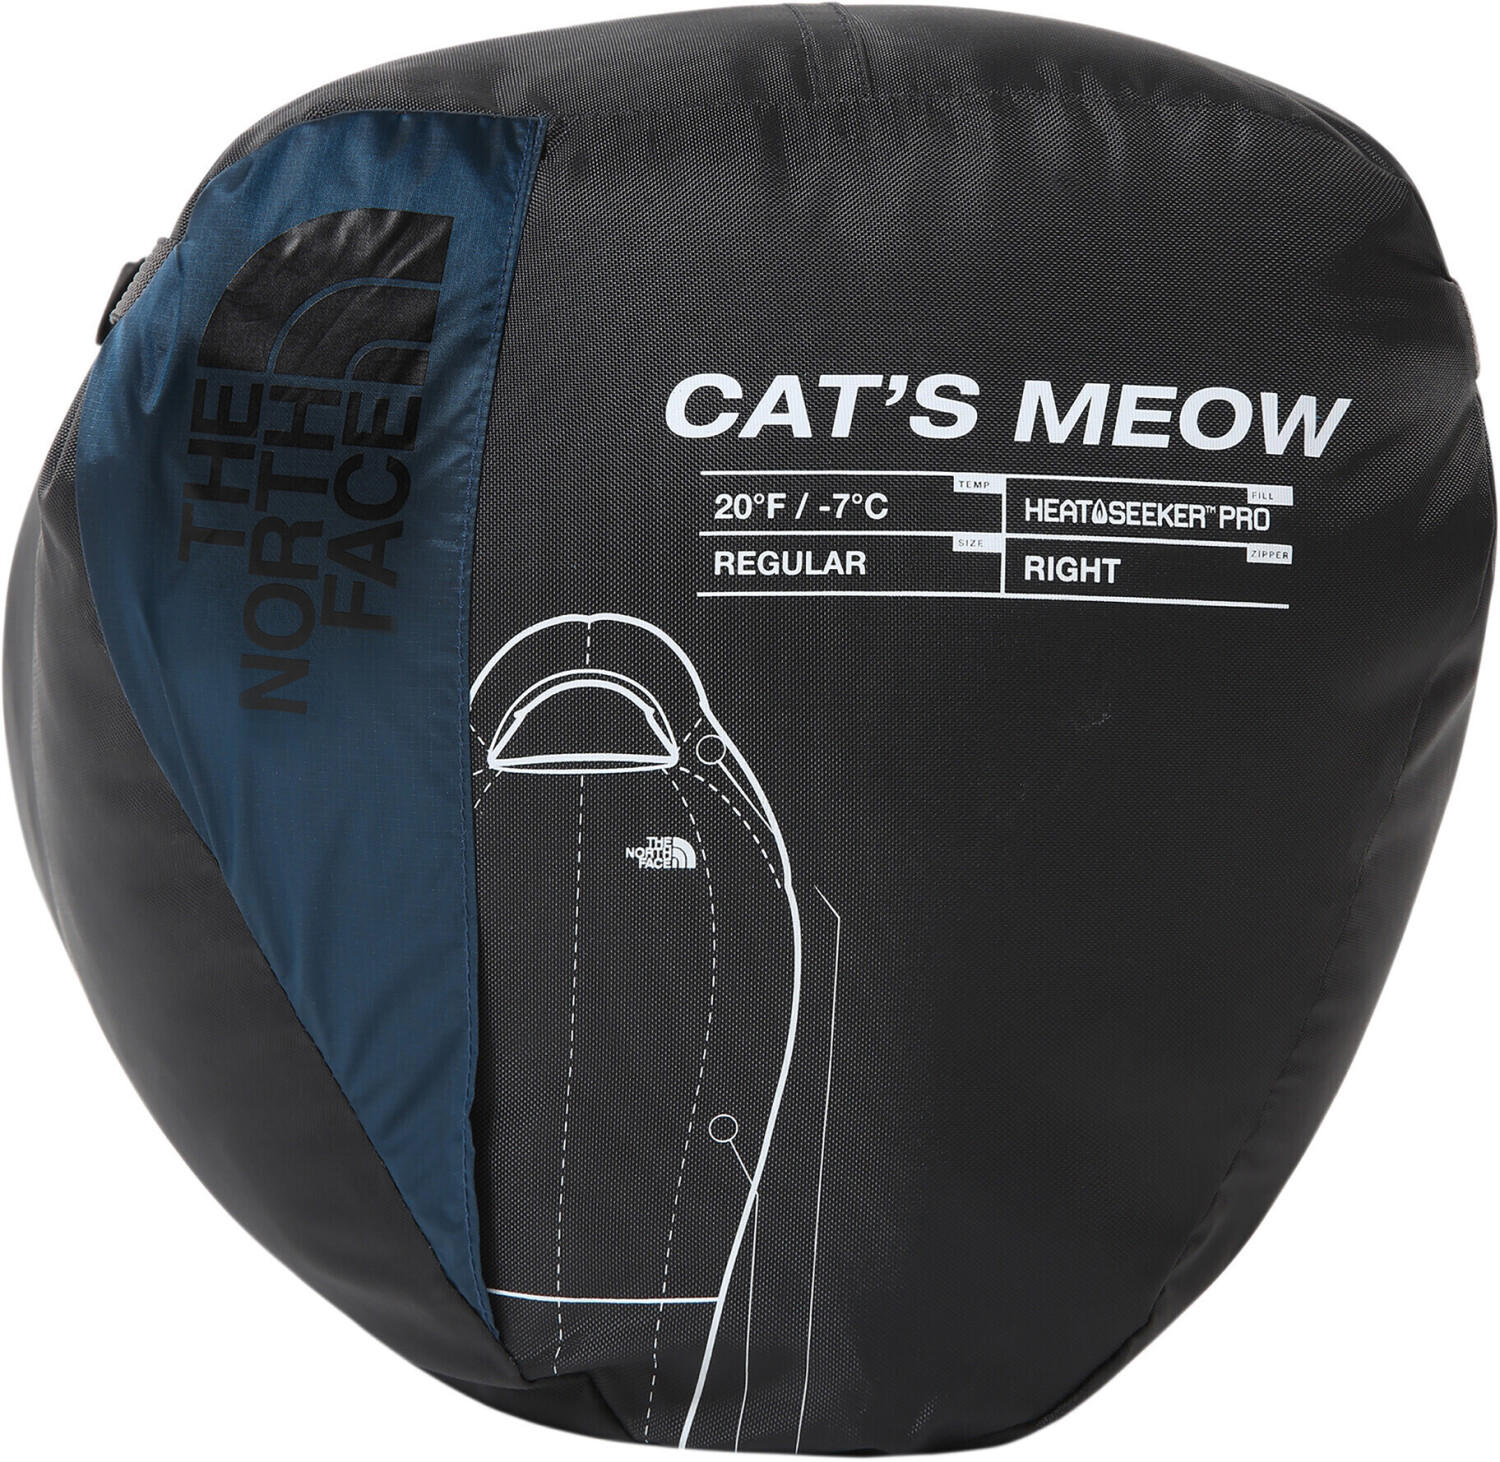 The North Face Cat's Meow Eco (Regular/RZ/banff blue)